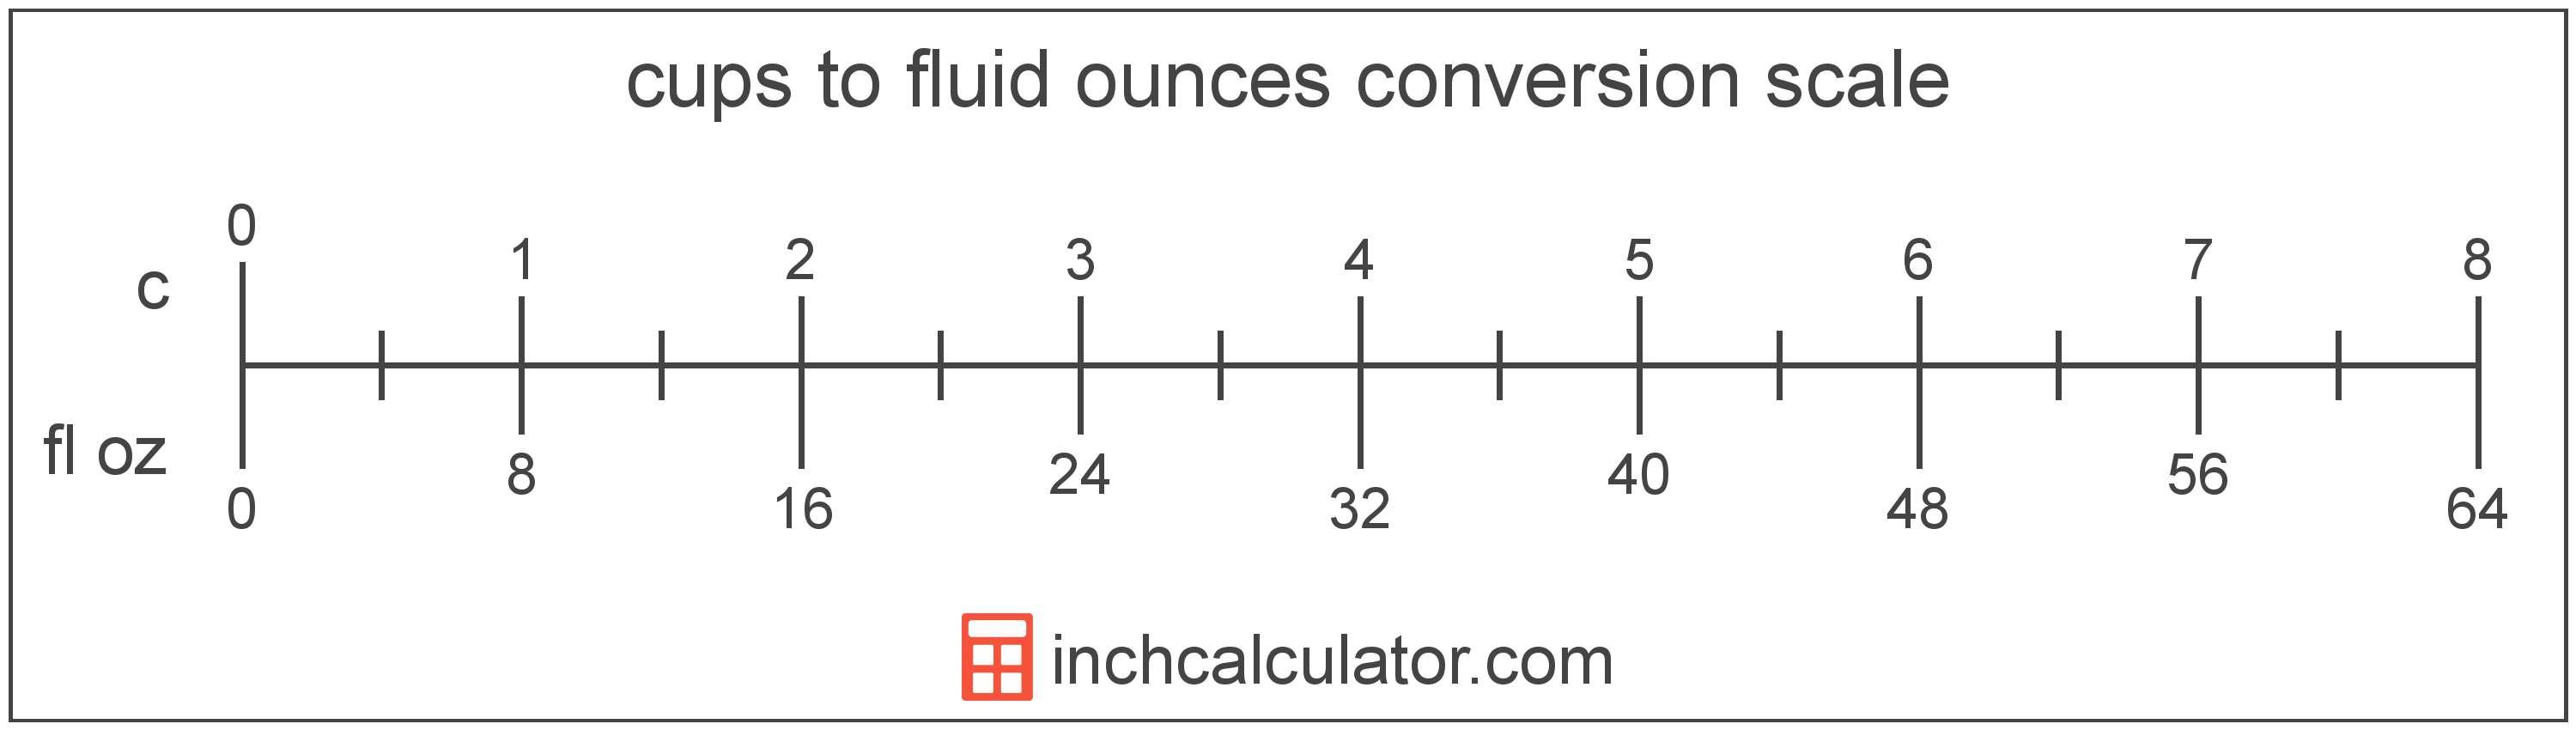 Printable Fluid Ounces to Cups Conversion Chart